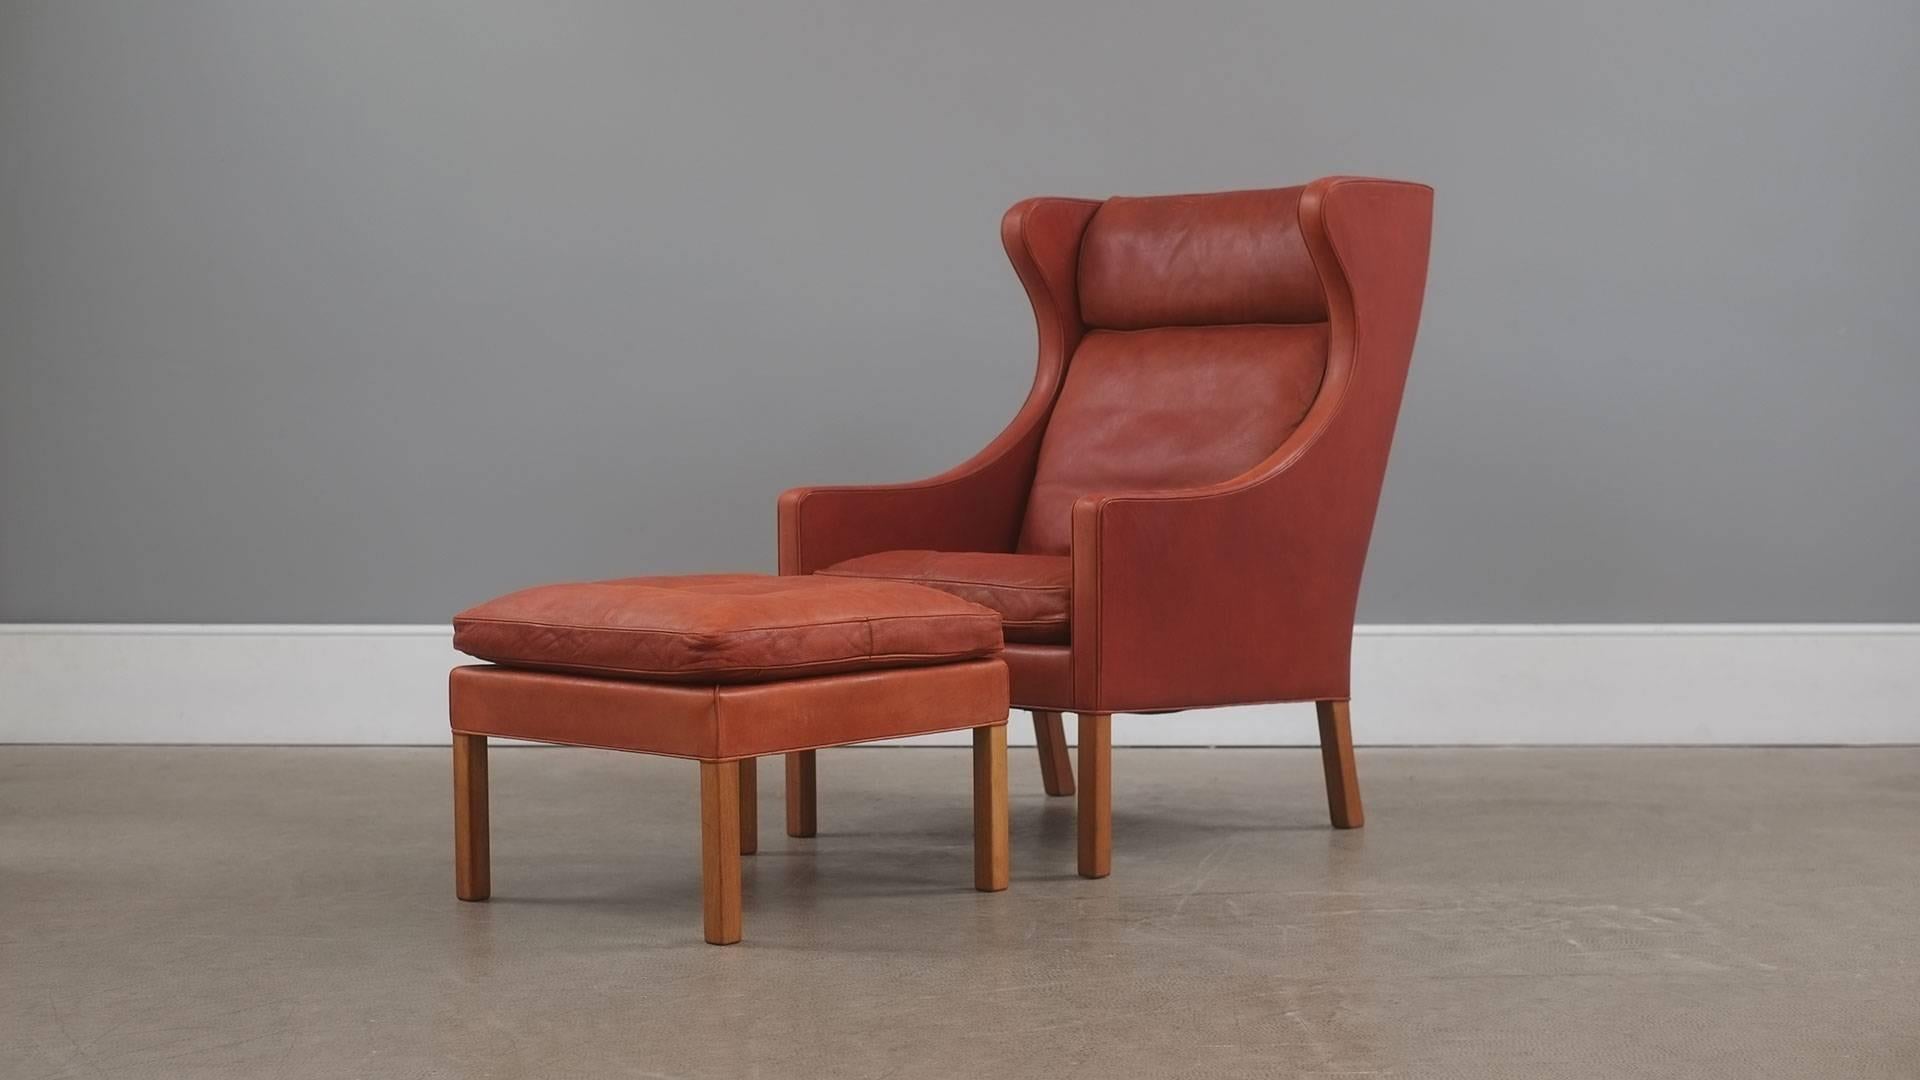 Amazing example of Borge Mogensen’s classic 2204 high back armchair and 2202 footstool for Fredericia, Denmark. This early chair and stool is in wonderful and super rare thick cognac analine leather with perfect patina. Originally purchased in 1971.